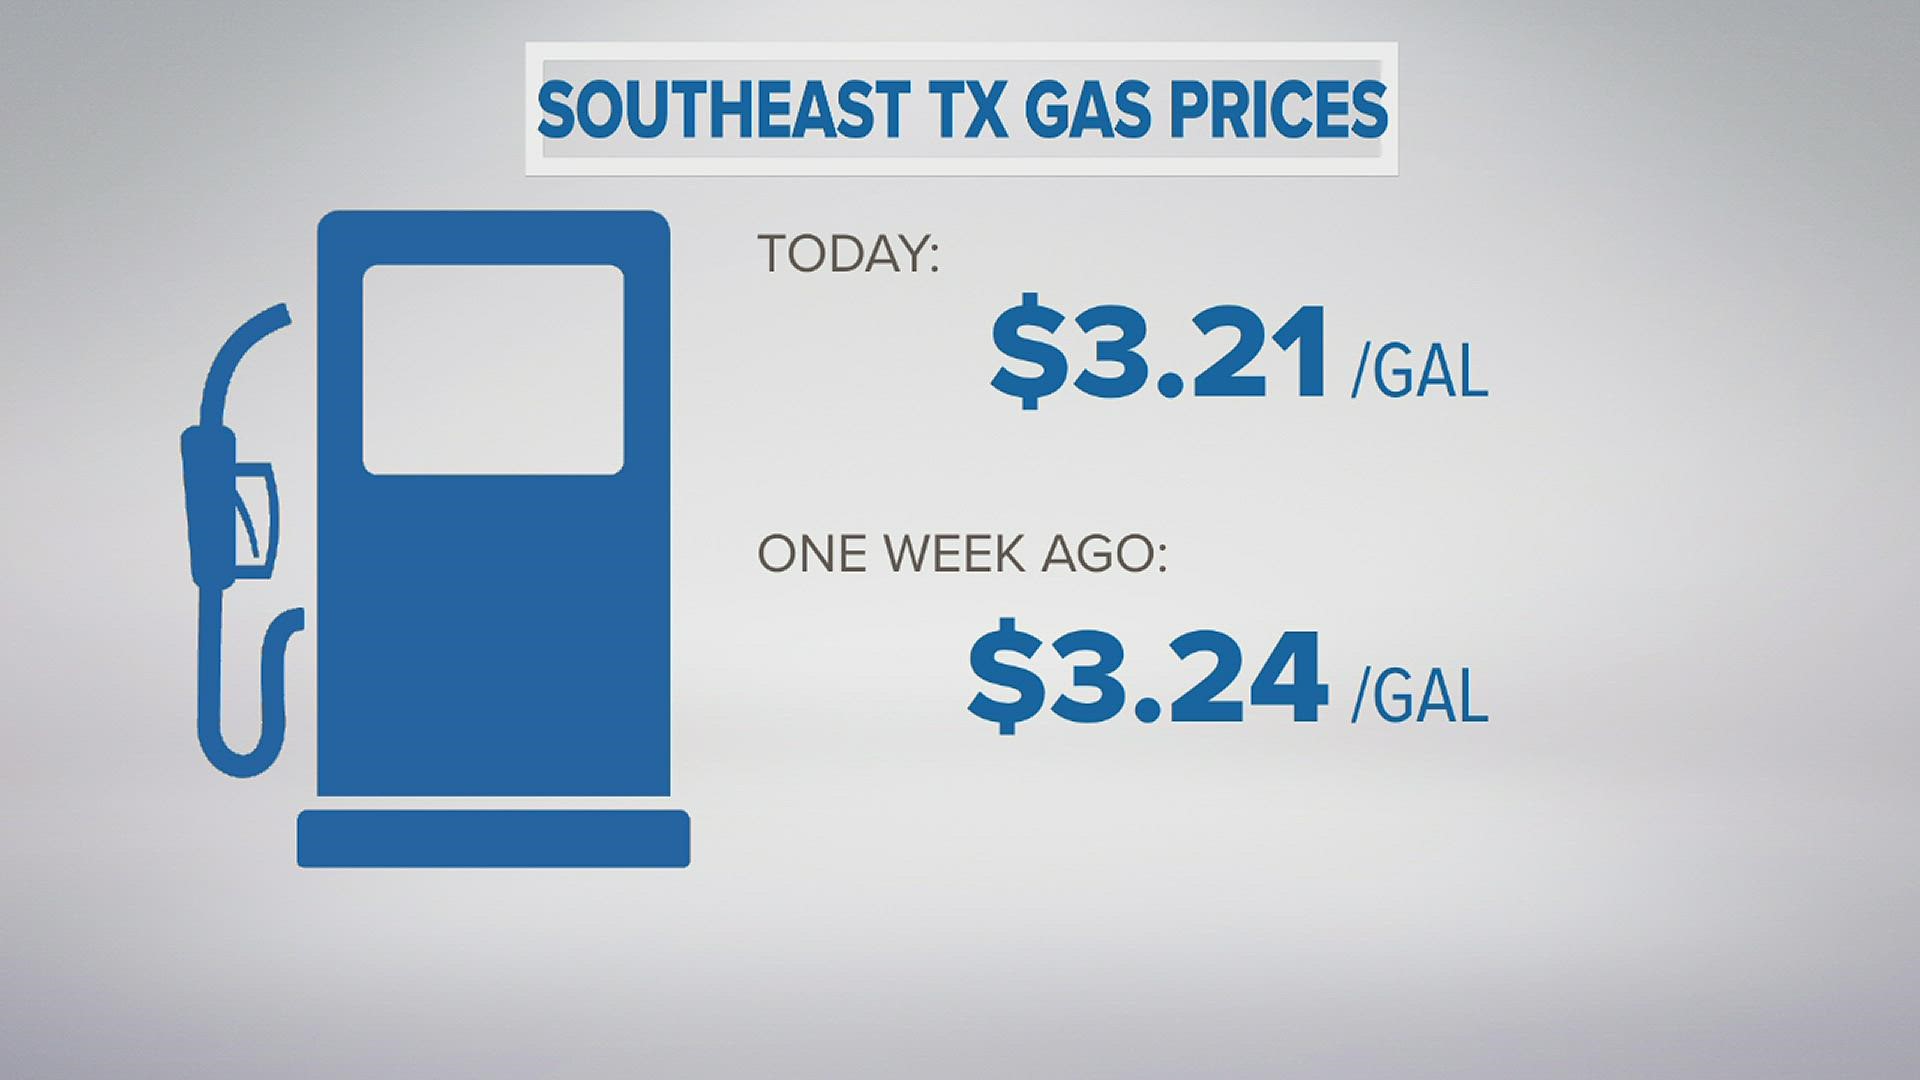 Southeast Texans are paying 3 cents less for regular gas than last week.